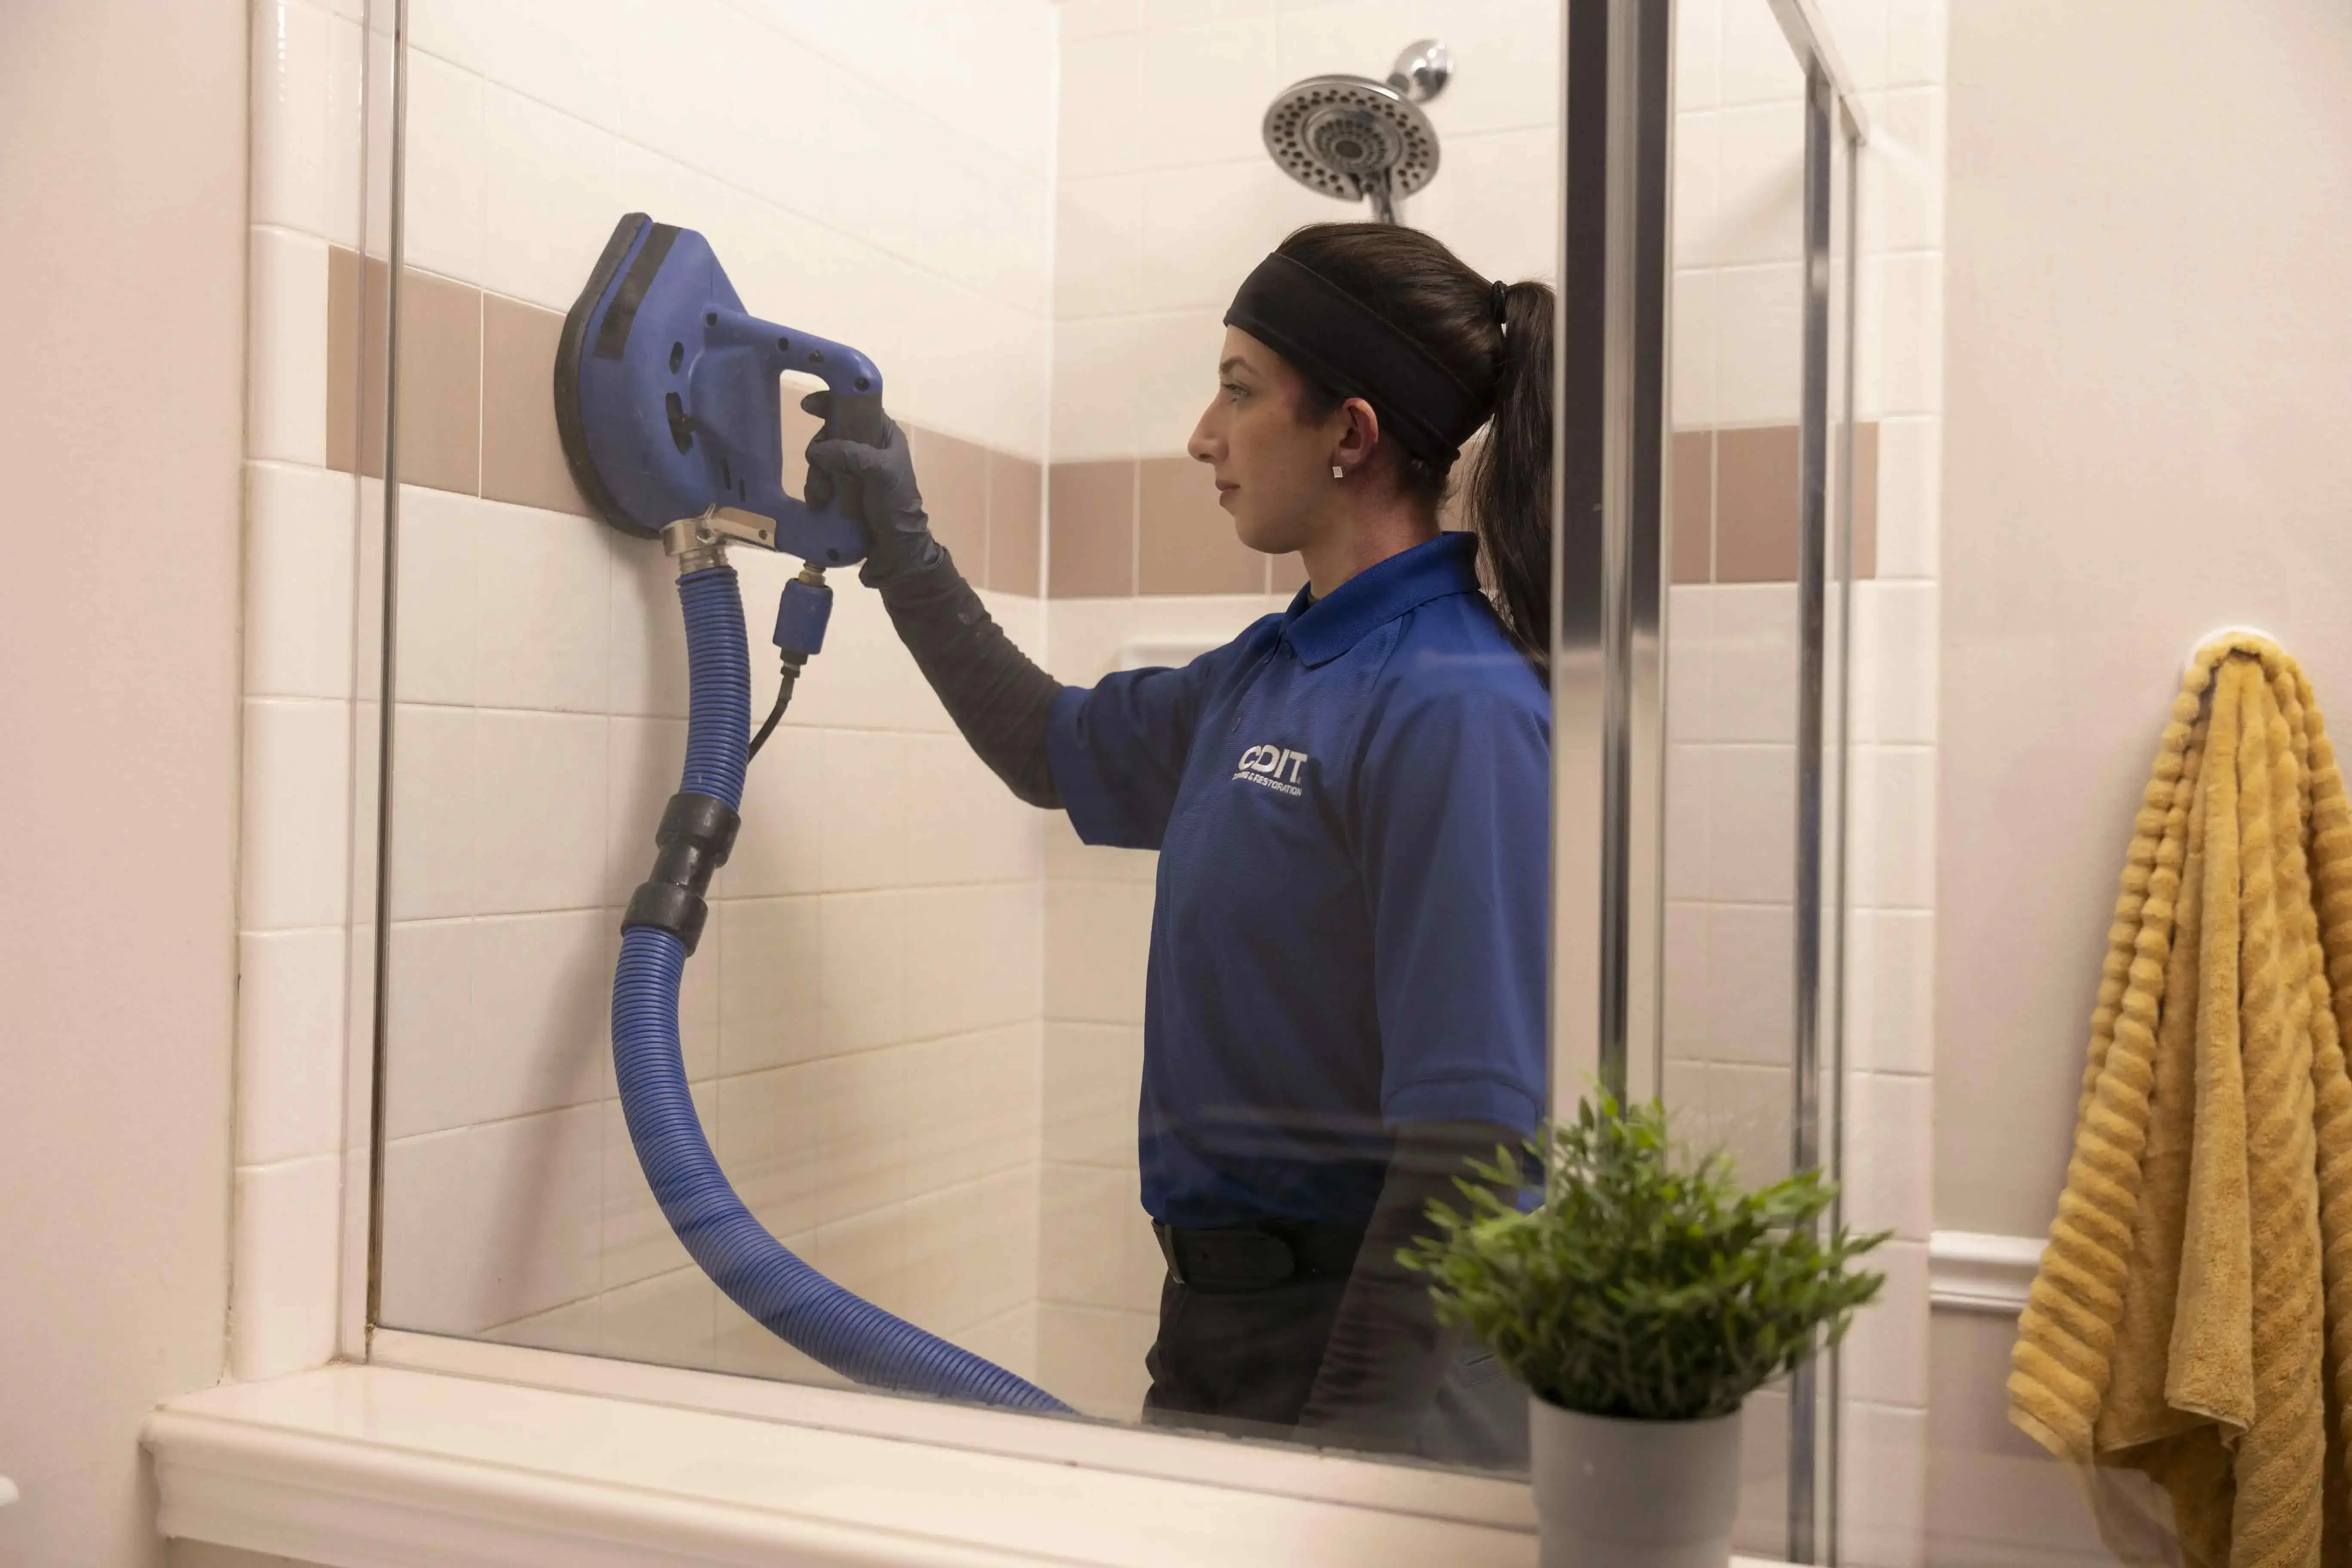 COIT can clean your tiles and grout with professional equipment when household cleaners don't get the job done